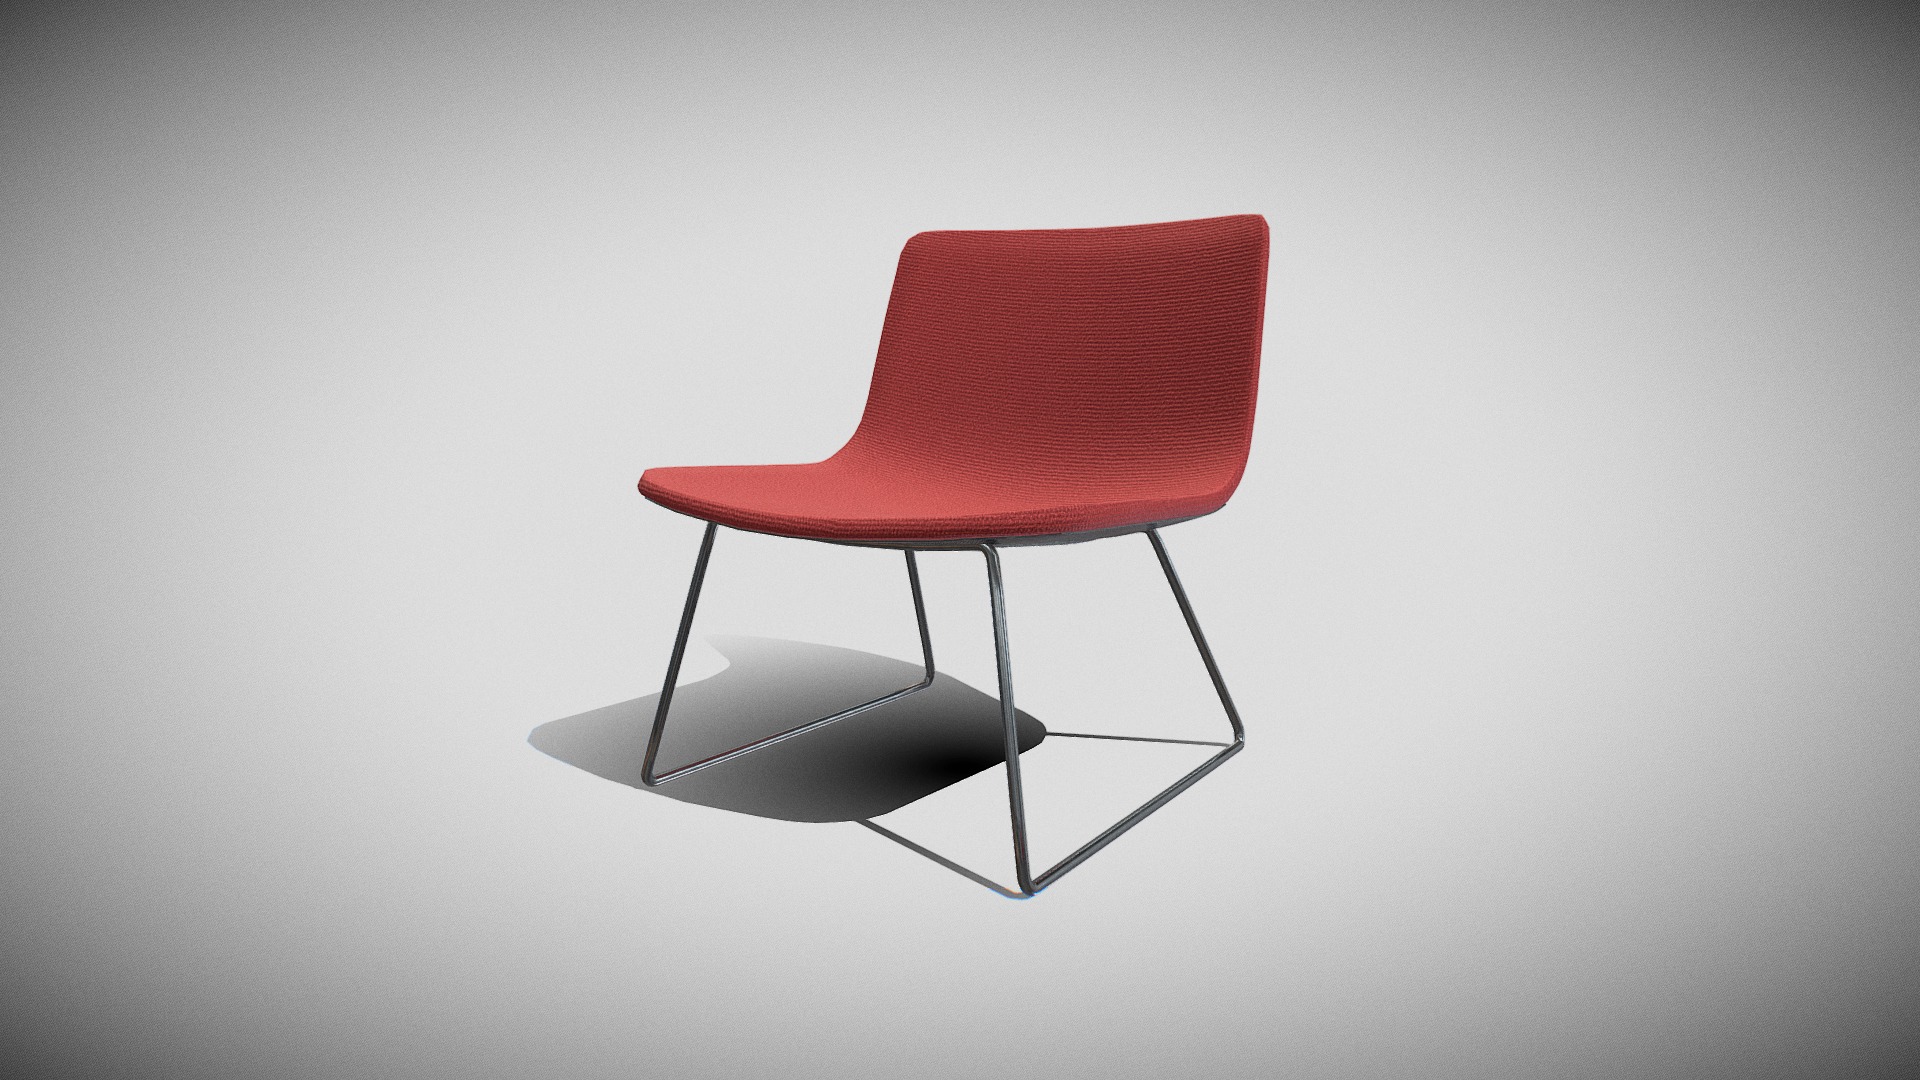 3D model PATO LOUNGE SLEDGE-MODEL 4372 Chrome v-02 - This is a 3D model of the PATO LOUNGE SLEDGE-MODEL 4372 Chrome v-02. The 3D model is about a red chair on a white background.